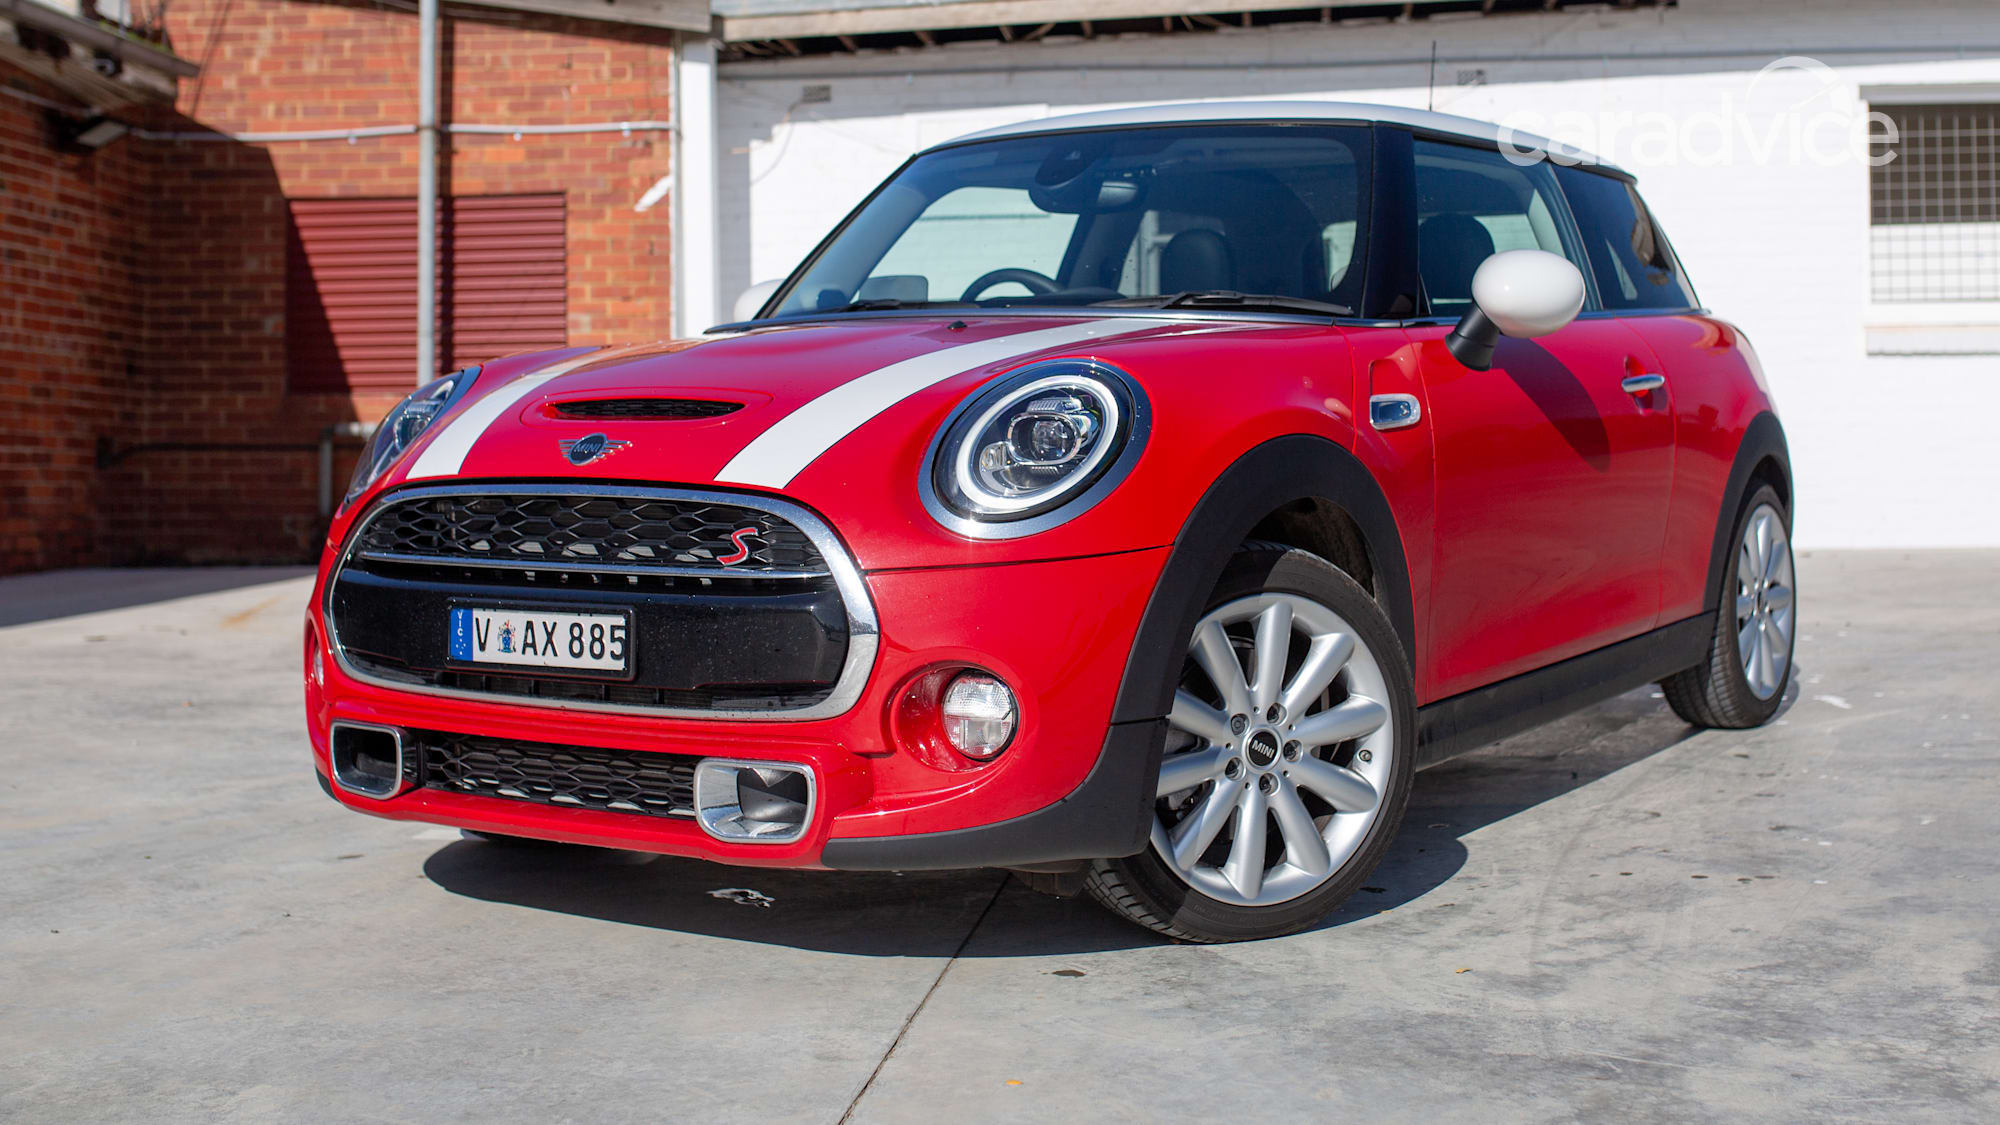 2020 Mini Cooper S long-term review: Introduction | CarAdvice